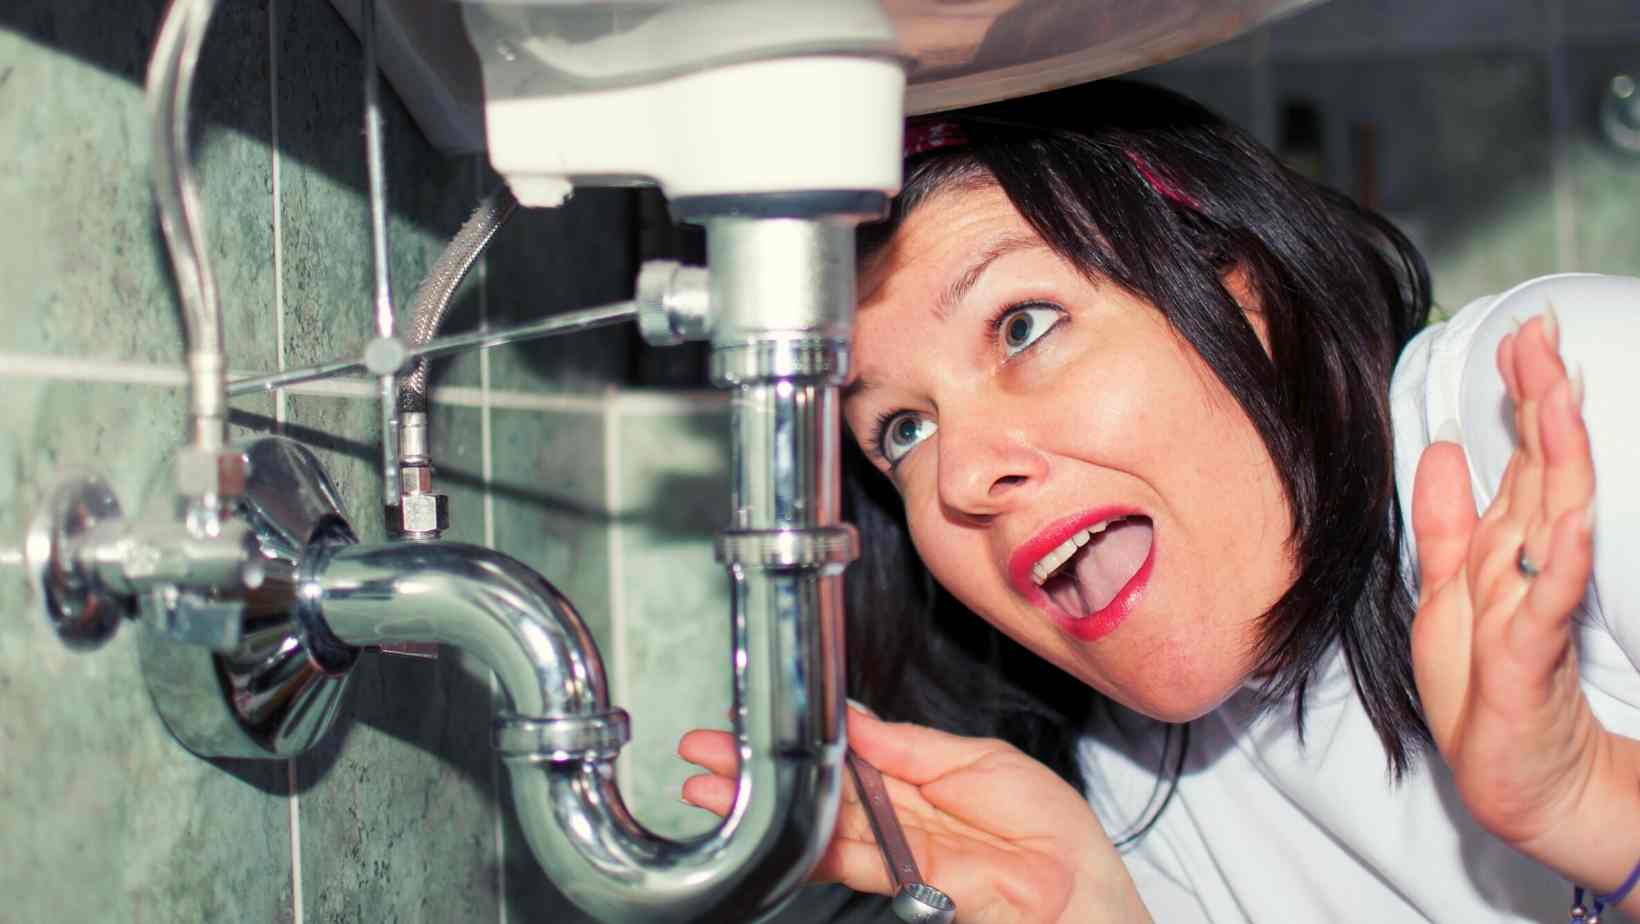 Learn how to fix clogged drains